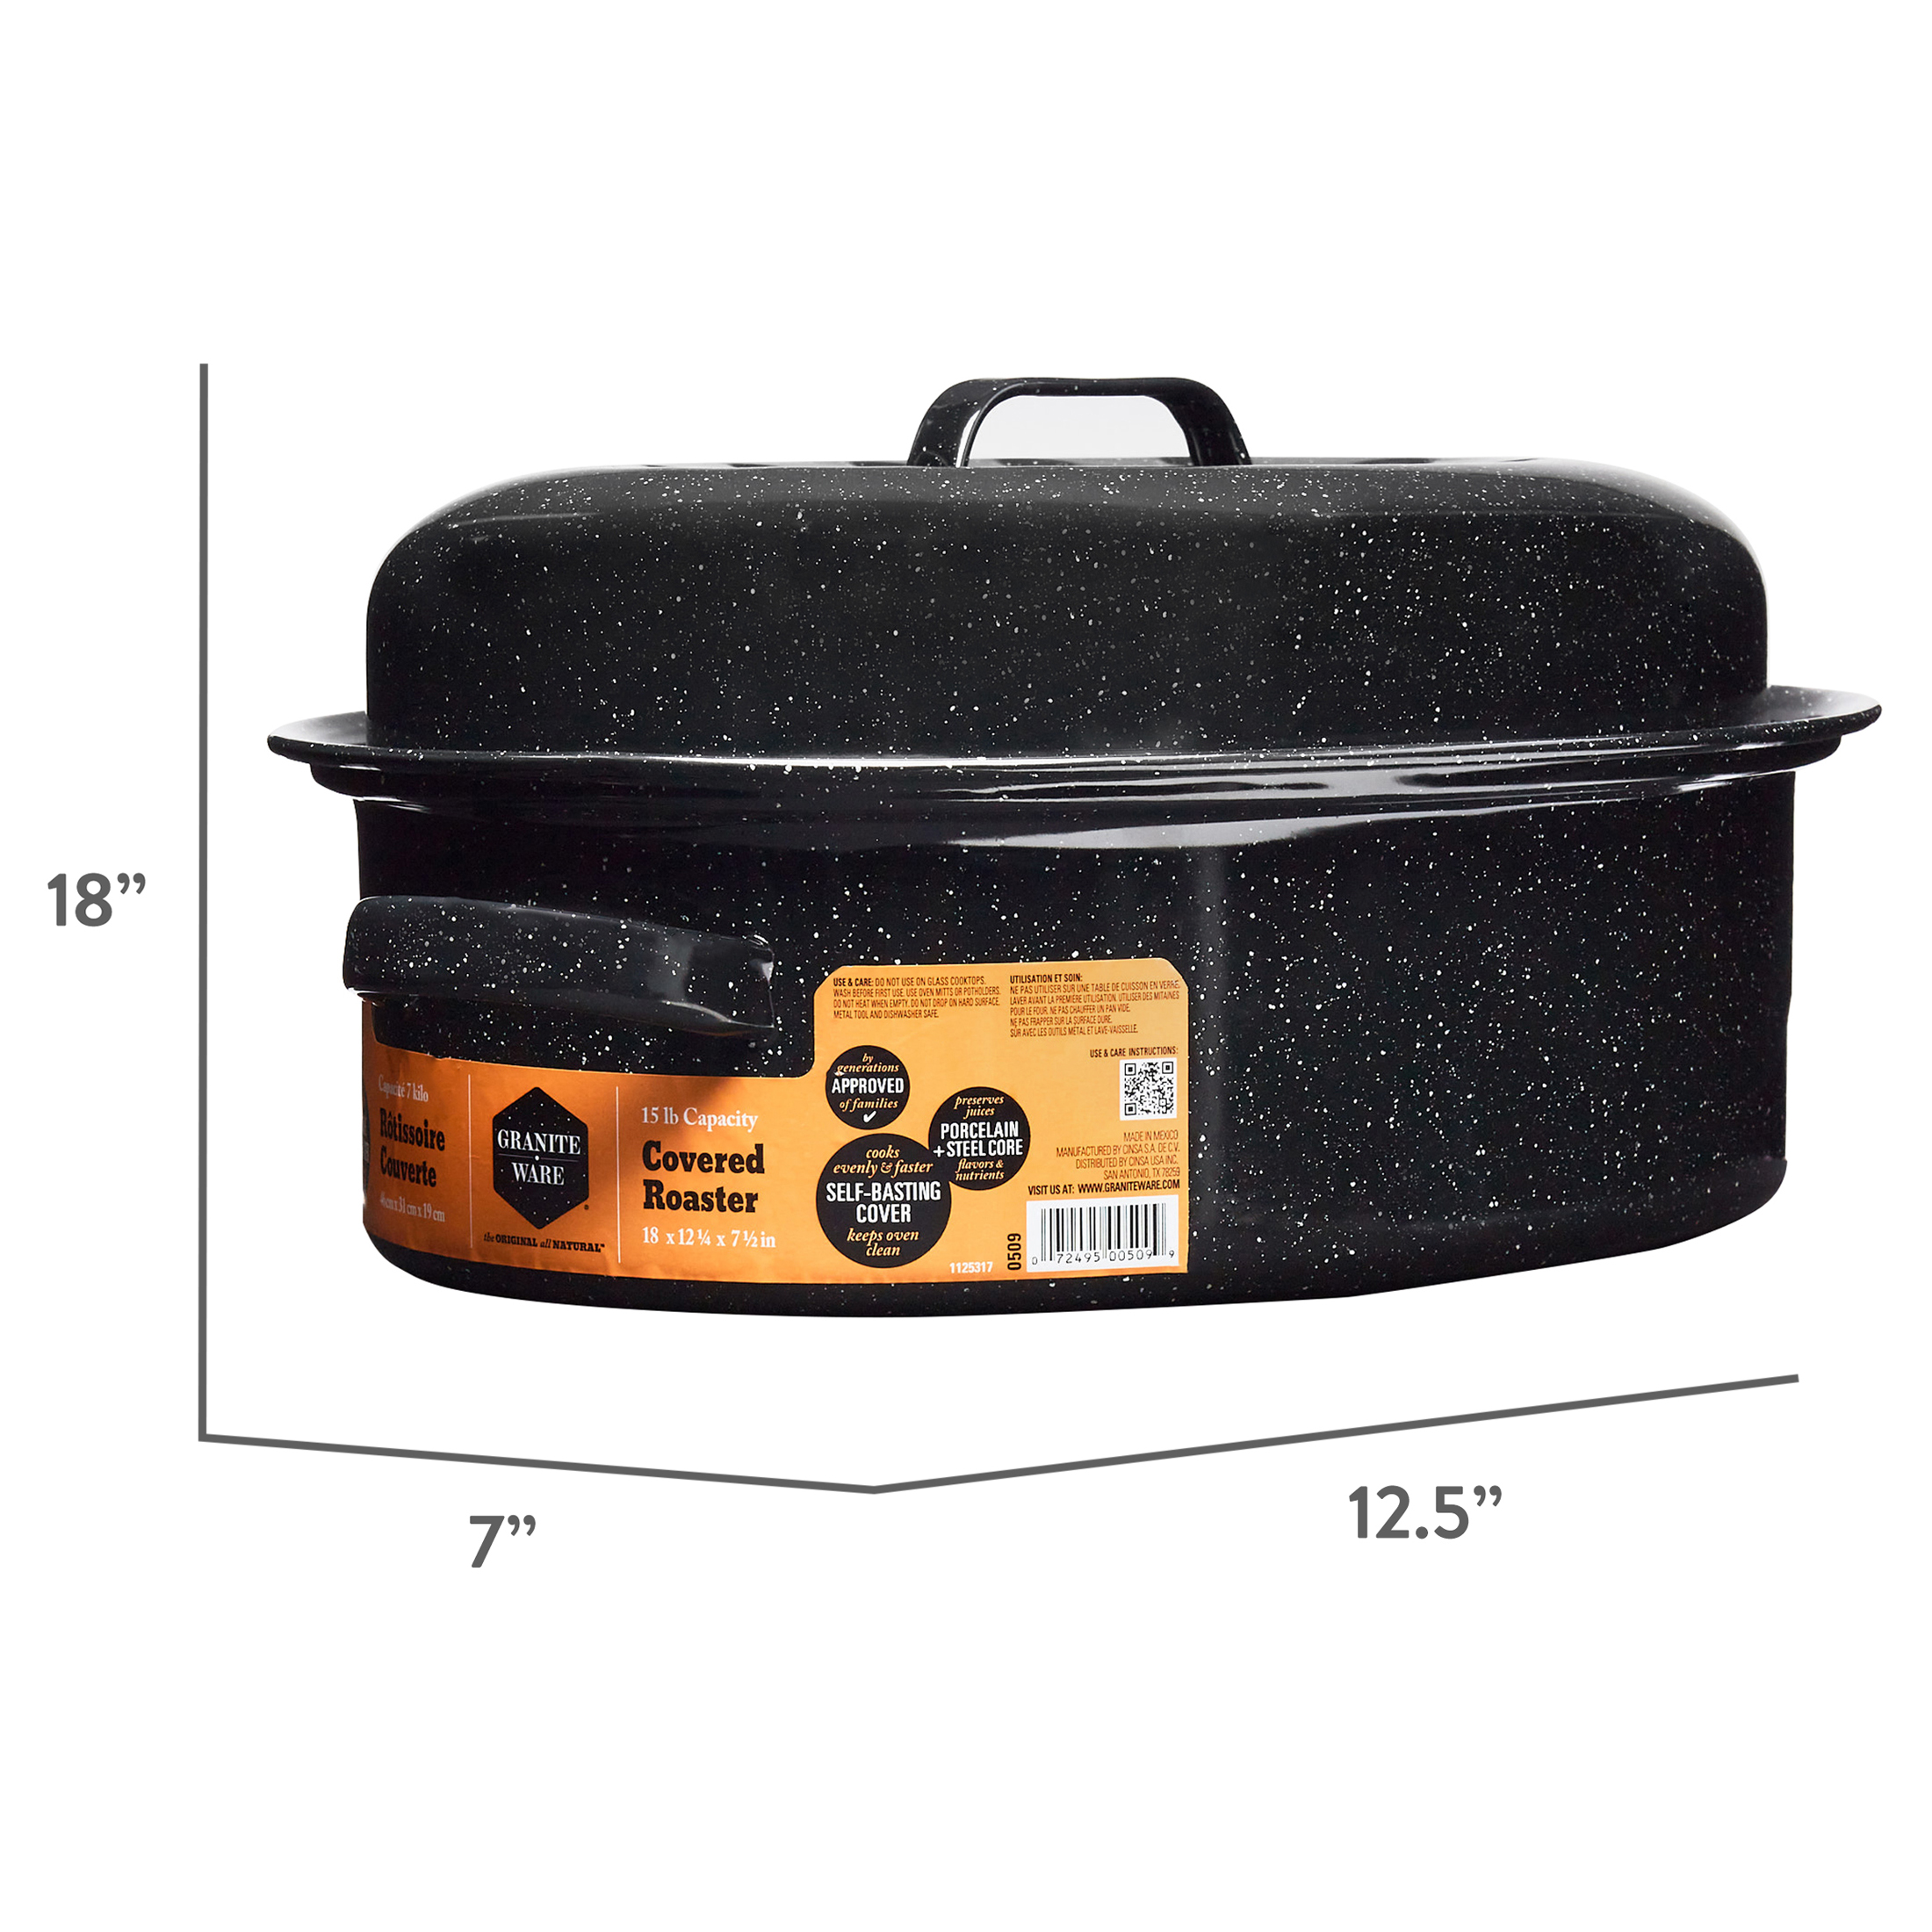 Granite Ware 18" Covered Oval Roaster, 15 Pound Capacity, Roasting Pan - image 4 of 5